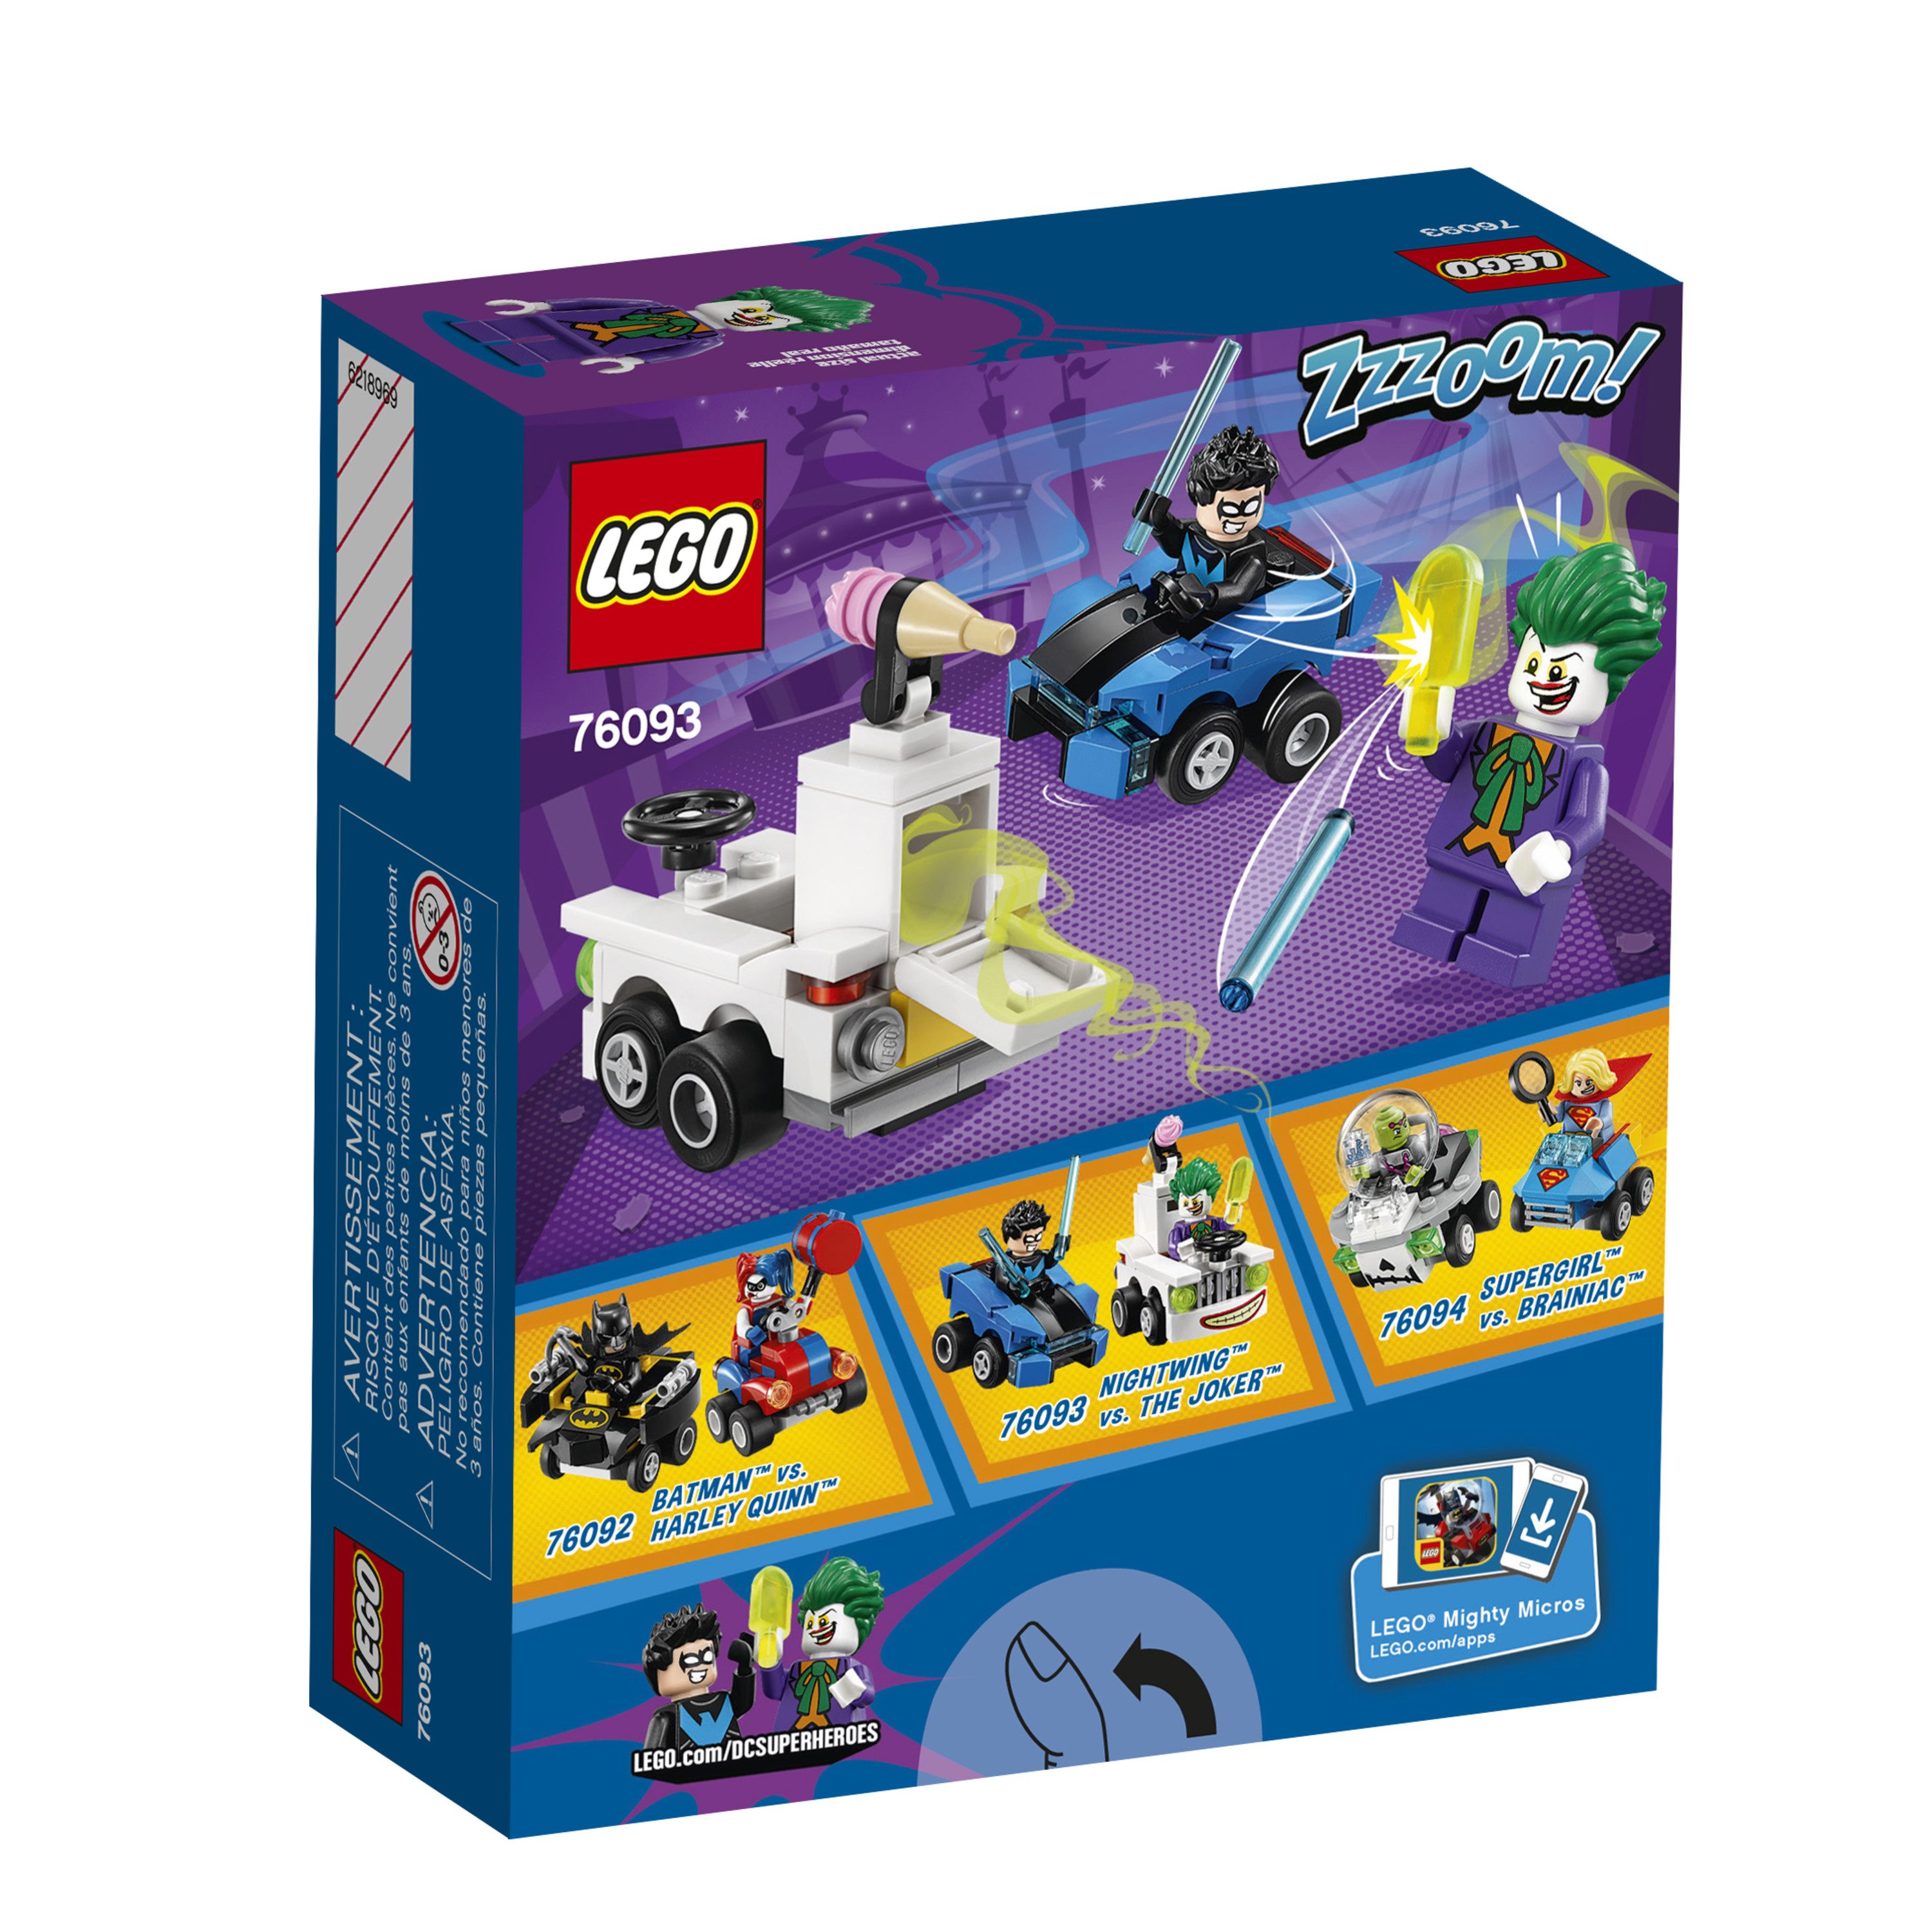 Lit Cars Enfant Magnifique Lego Super Heroes Mighty Micros Nightwing Vs the Joker